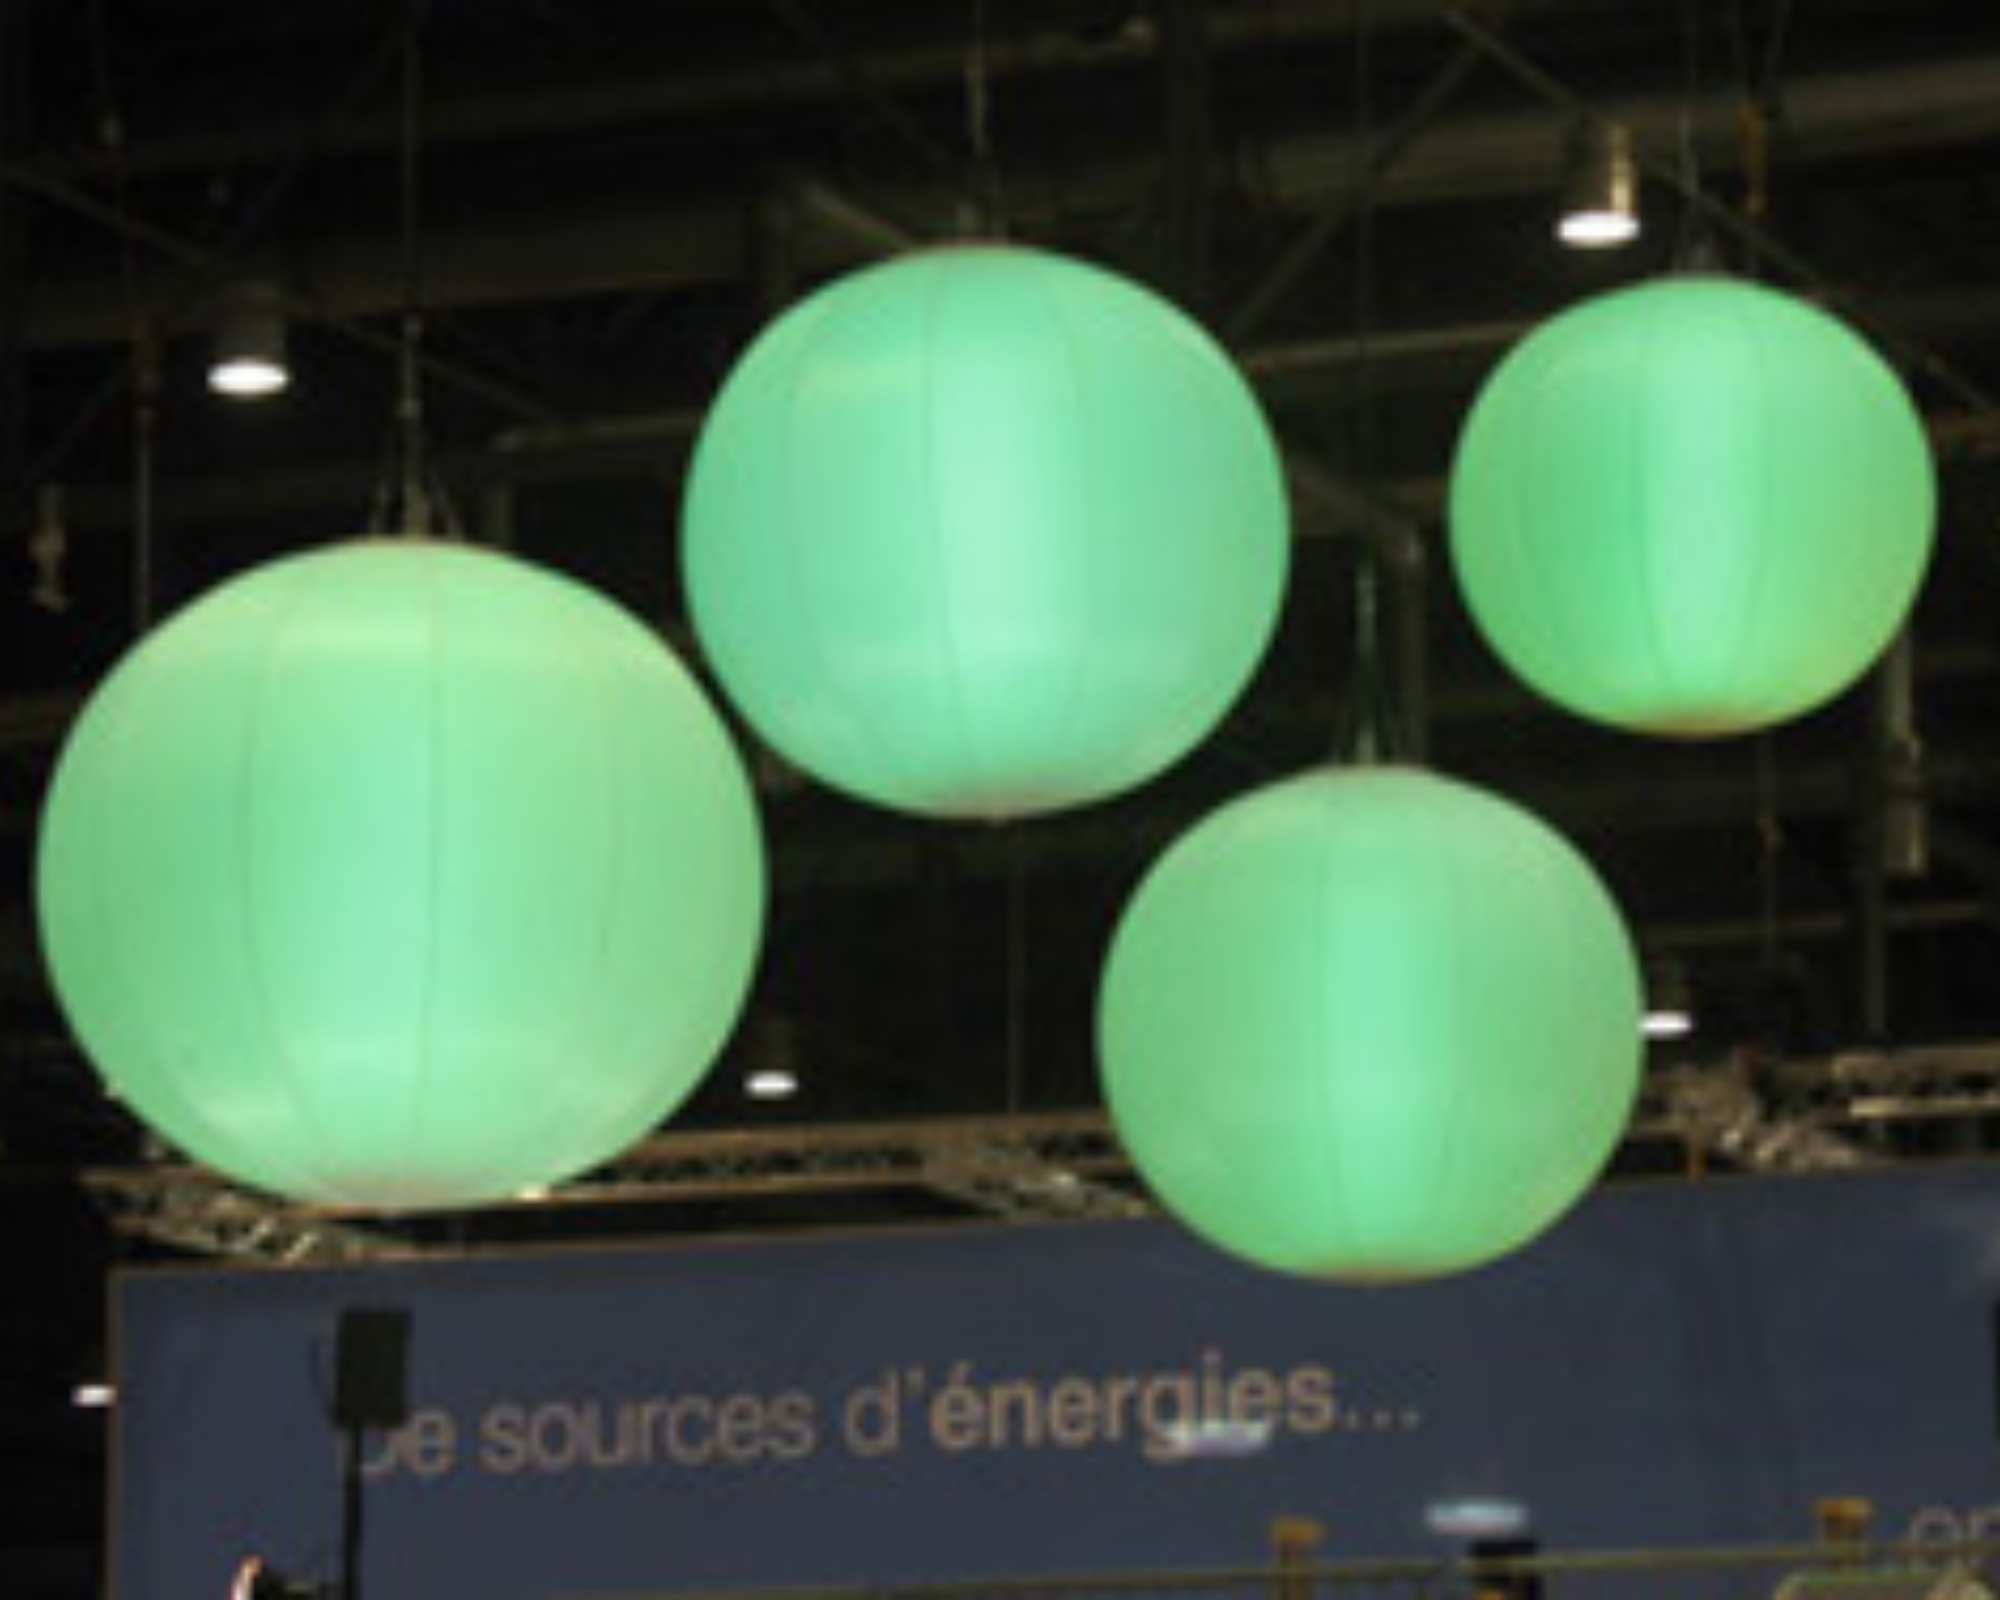 Case study - Balloon lighting for firefighters at a trade fair